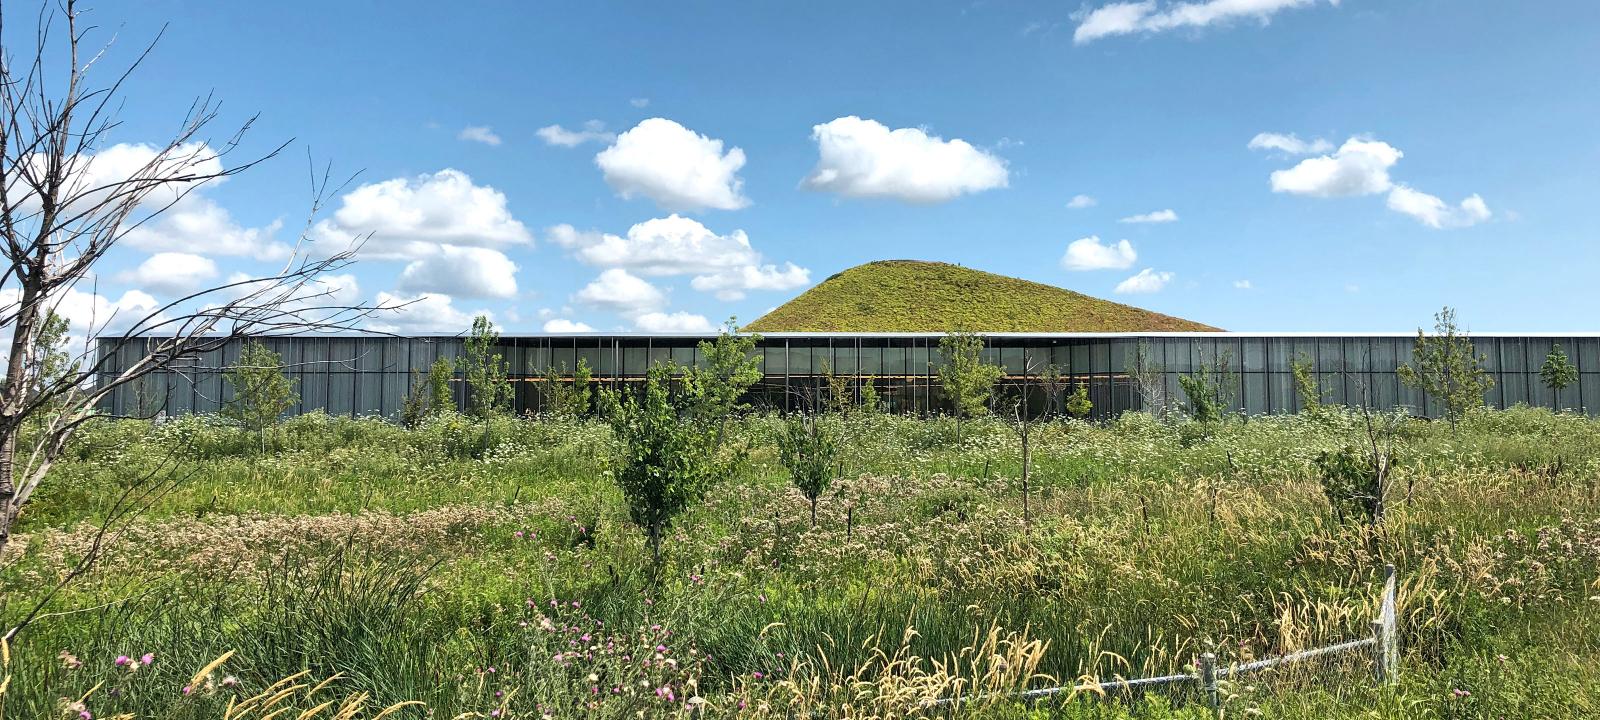 A meadow in front of a building with a pitched green roof